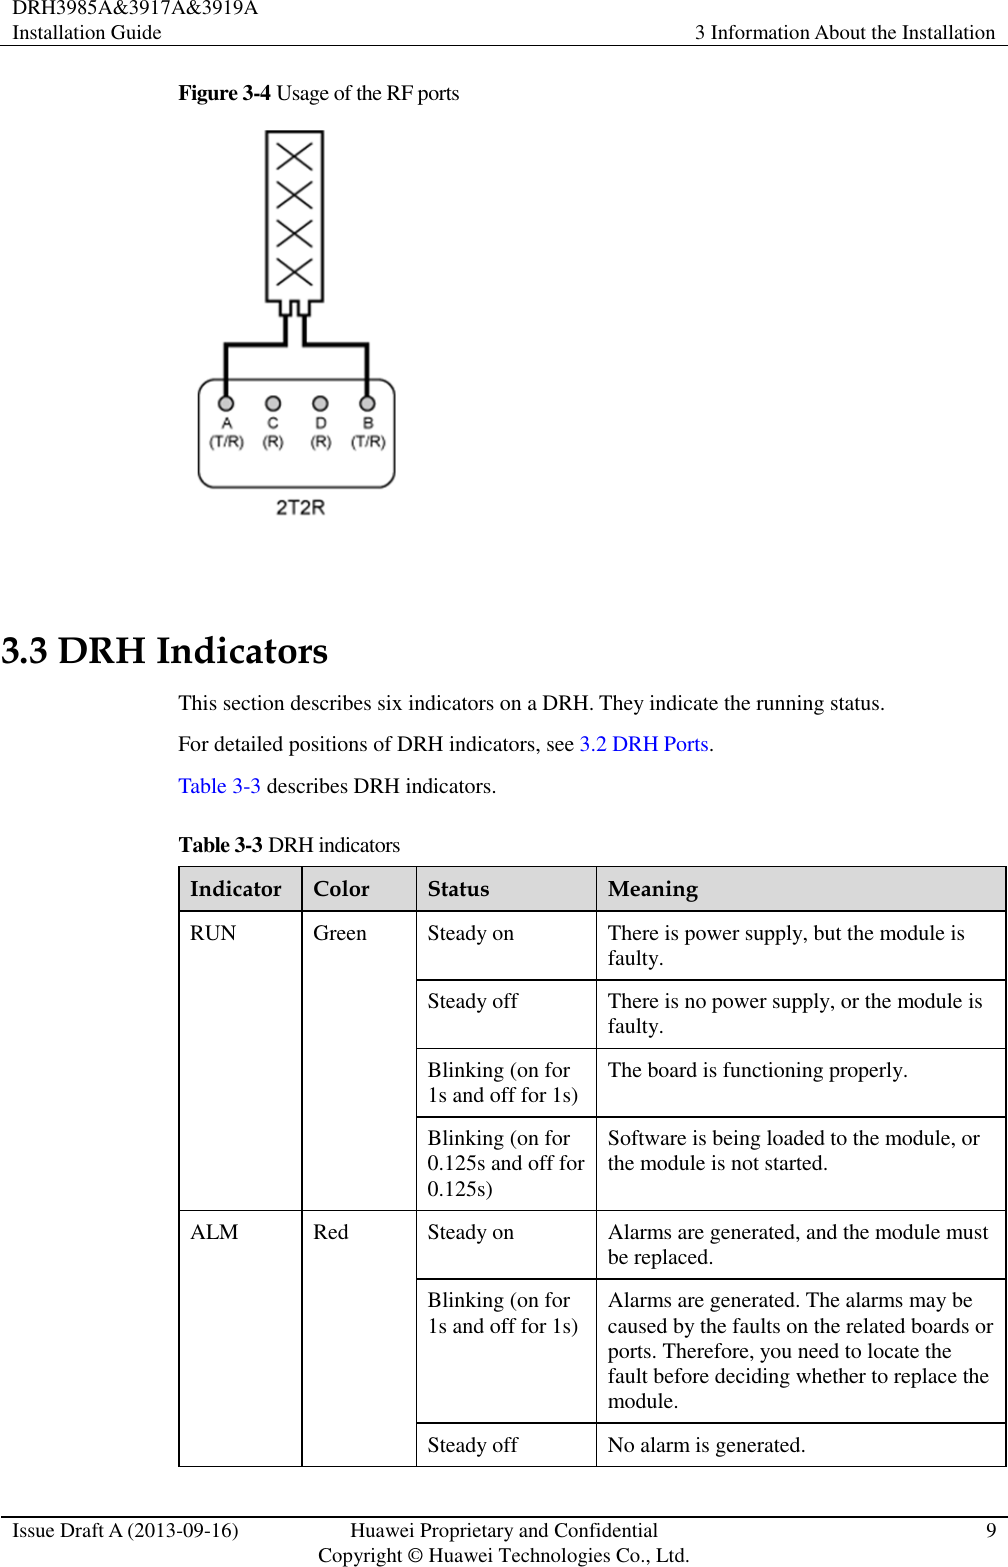 DRH3985A&amp;3917A&amp;3919A Installation Guide 3 Information About the Installation  Issue Draft A (2013-09-16) Huawei Proprietary and Confidential                                     Copyright © Huawei Technologies Co., Ltd. 9  Figure 3-4 Usage of the RF ports   3.3 DRH Indicators This section describes six indicators on a DRH. They indicate the running status.   For detailed positions of DRH indicators, see 3.2 DRH Ports. Table 3-3 describes DRH indicators. Table 3-3 DRH indicators Indicator Color Status Meaning RUN Green Steady on There is power supply, but the module is faulty. Steady off There is no power supply, or the module is faulty. Blinking (on for 1s and off for 1s) The board is functioning properly. Blinking (on for 0.125s and off for 0.125s) Software is being loaded to the module, or the module is not started. ALM Red Steady on Alarms are generated, and the module must be replaced. Blinking (on for 1s and off for 1s) Alarms are generated. The alarms may be caused by the faults on the related boards or ports. Therefore, you need to locate the fault before deciding whether to replace the module. Steady off No alarm is generated. 